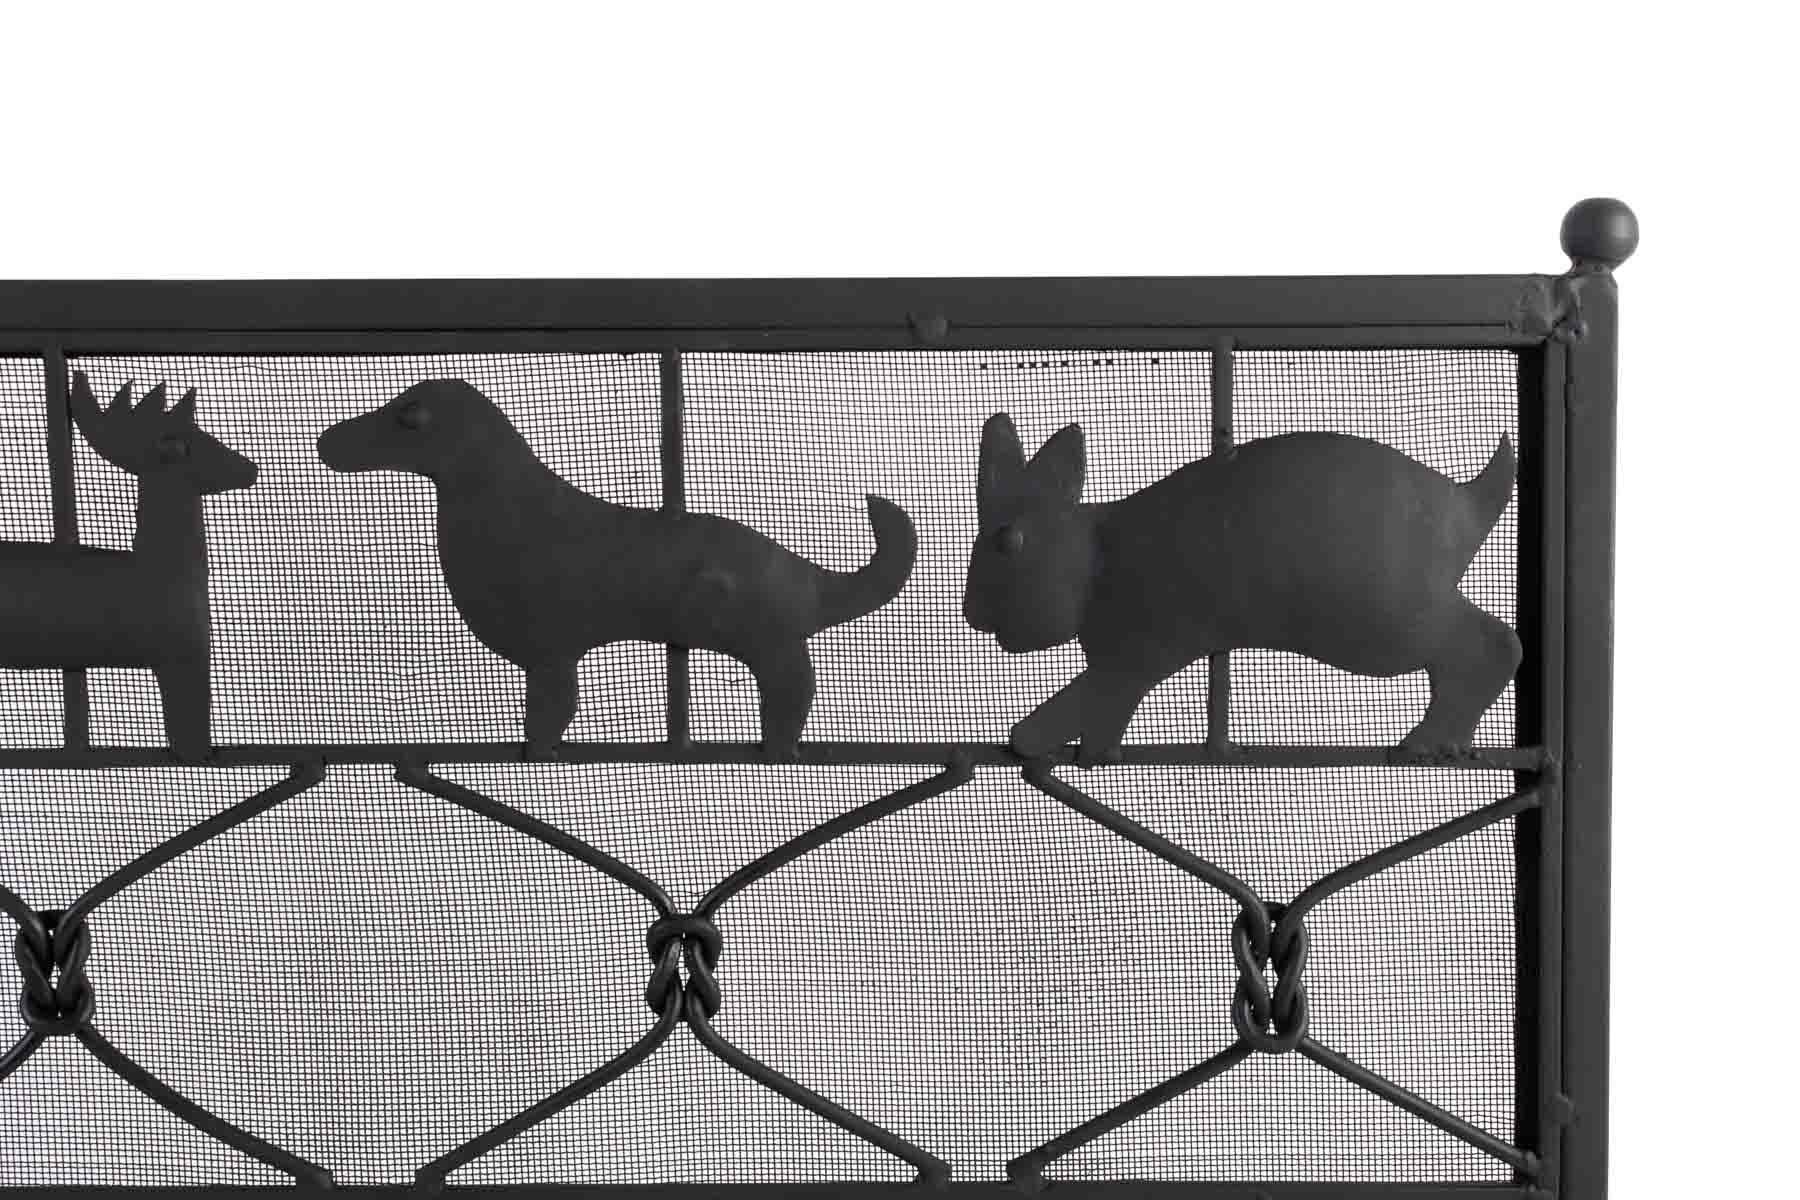 Ateliers Marolles fire screen in wrought iron, 1950.
Beautiful ironwork on animal nature, represented by rabbits, horses, dogs and deer.
The part exposed to the fires is covered with a very fine mesh for more security.